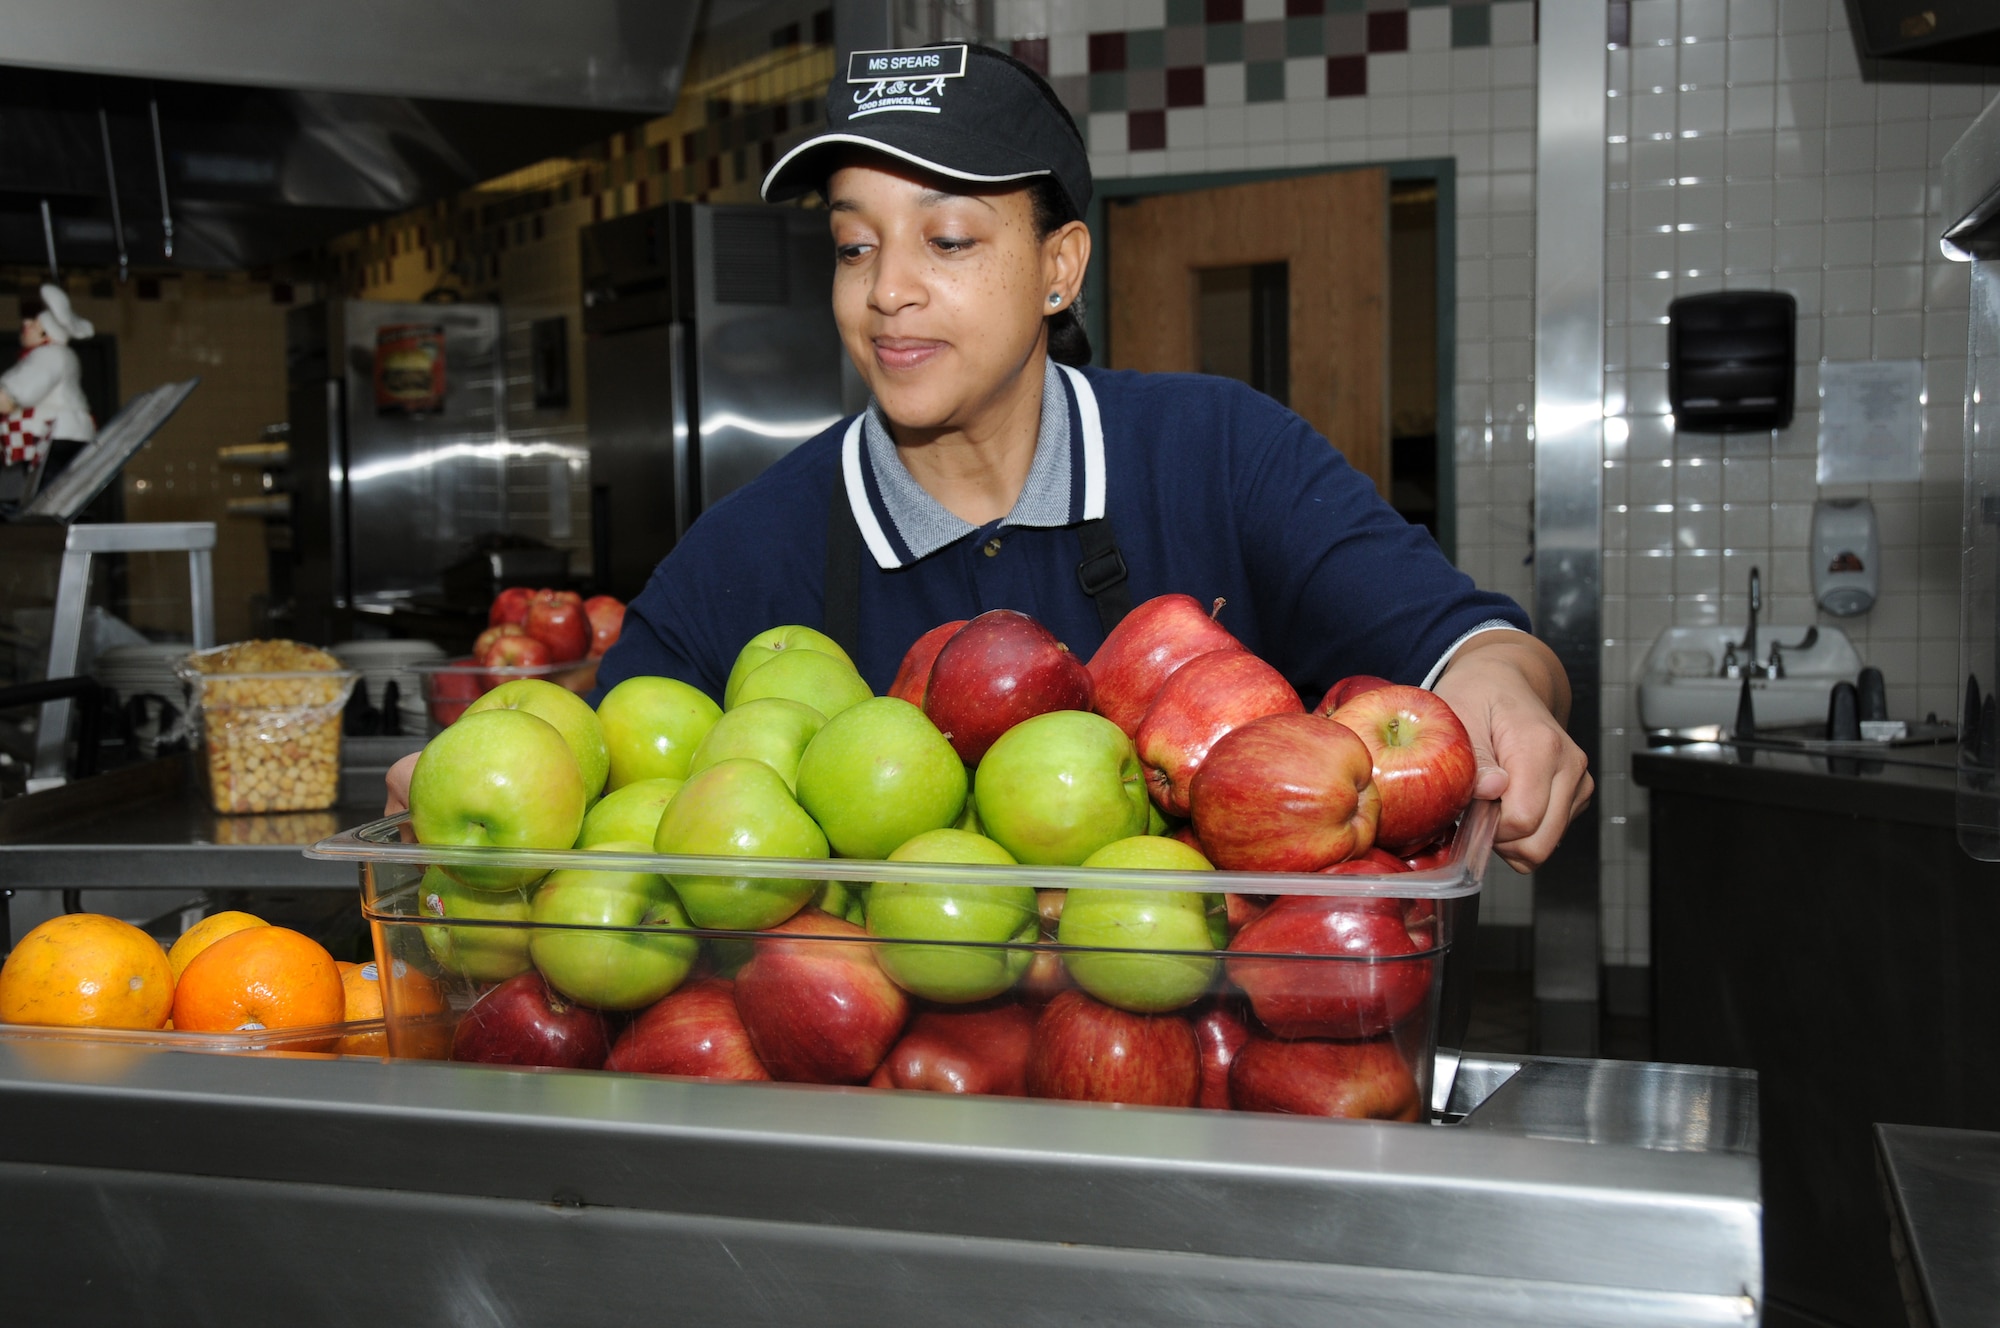 Natasha Spears, 81st Force Support Squadron salad preparer, sets fruit out on the salad bar at the Azalea Dining Facility, Keesler Air Force Base, Miss., Feb. 6, 2012.  Keesler is this year’s Air Education and Training Command nominee for the John L. Hennessy Award as the top food service operation in the Air Force in the multiple facility category.  (U.S. Air Force photo by Kemberly Groue)